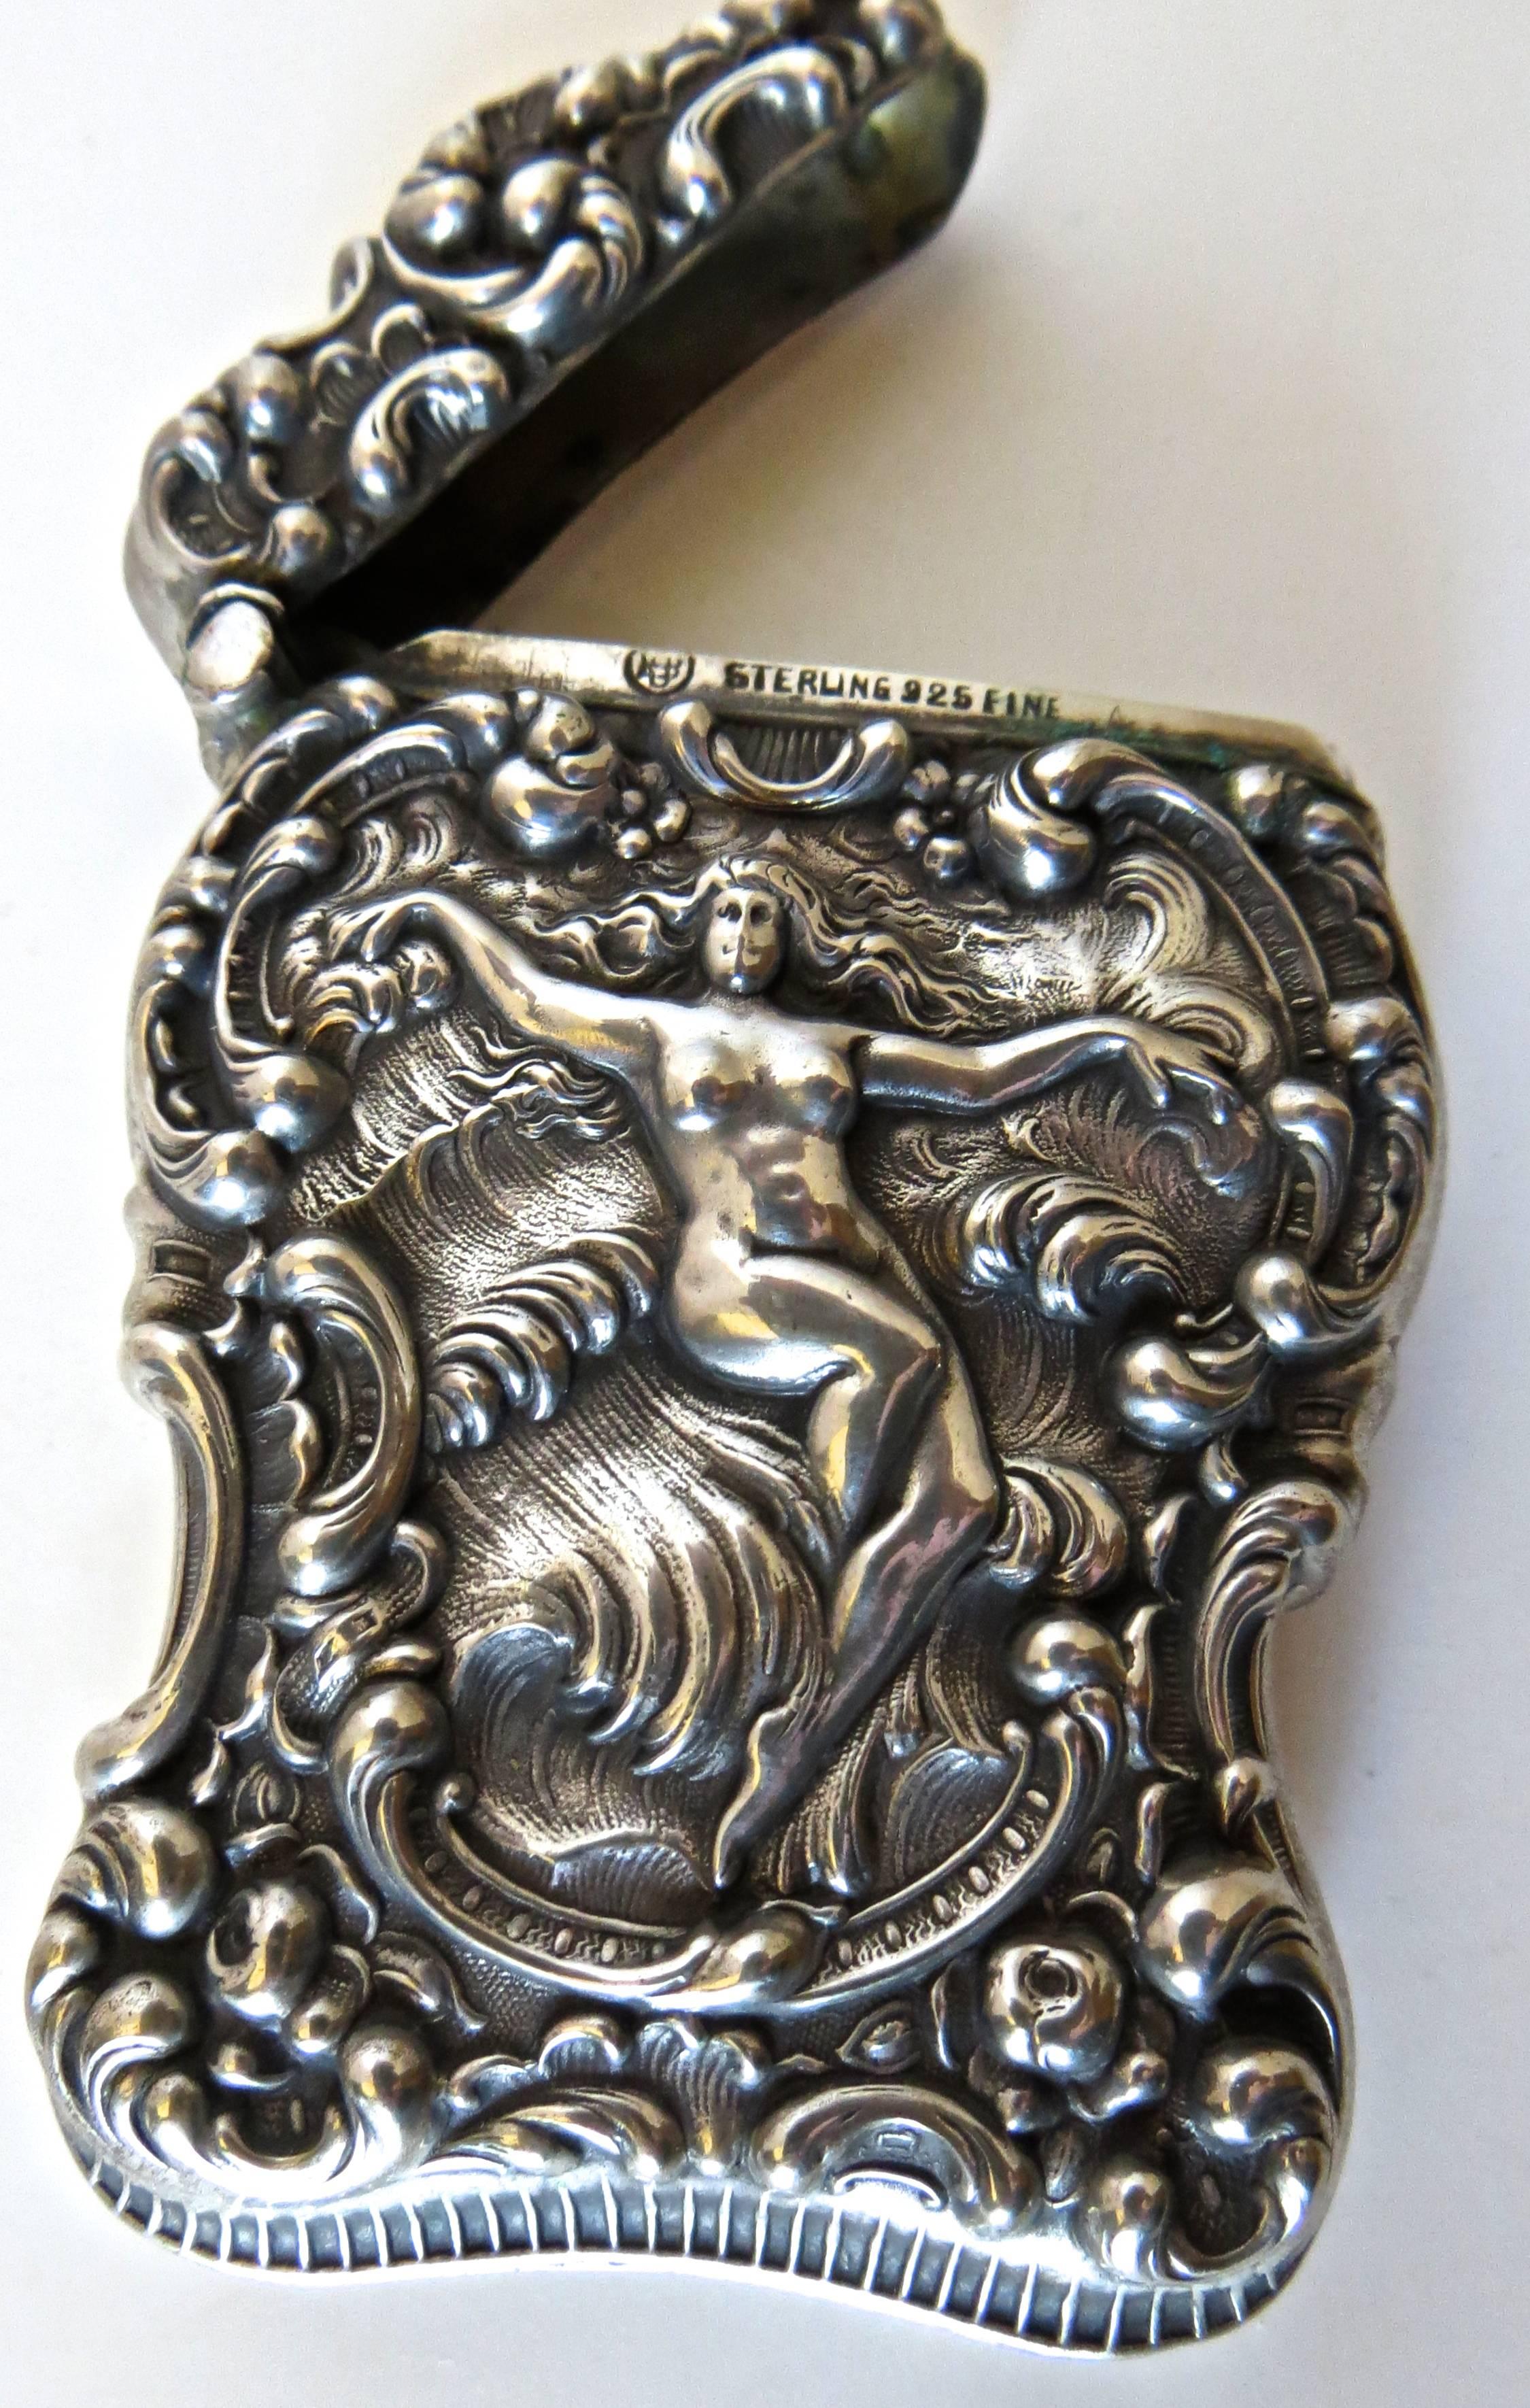 Listed is a quality Art Nouveau sterling silver match safe in repousse relief. It is typical of risque bar items used at the turn of the century, with a nude floating on a cloud as the central theme, and an elaborate floral design framing the